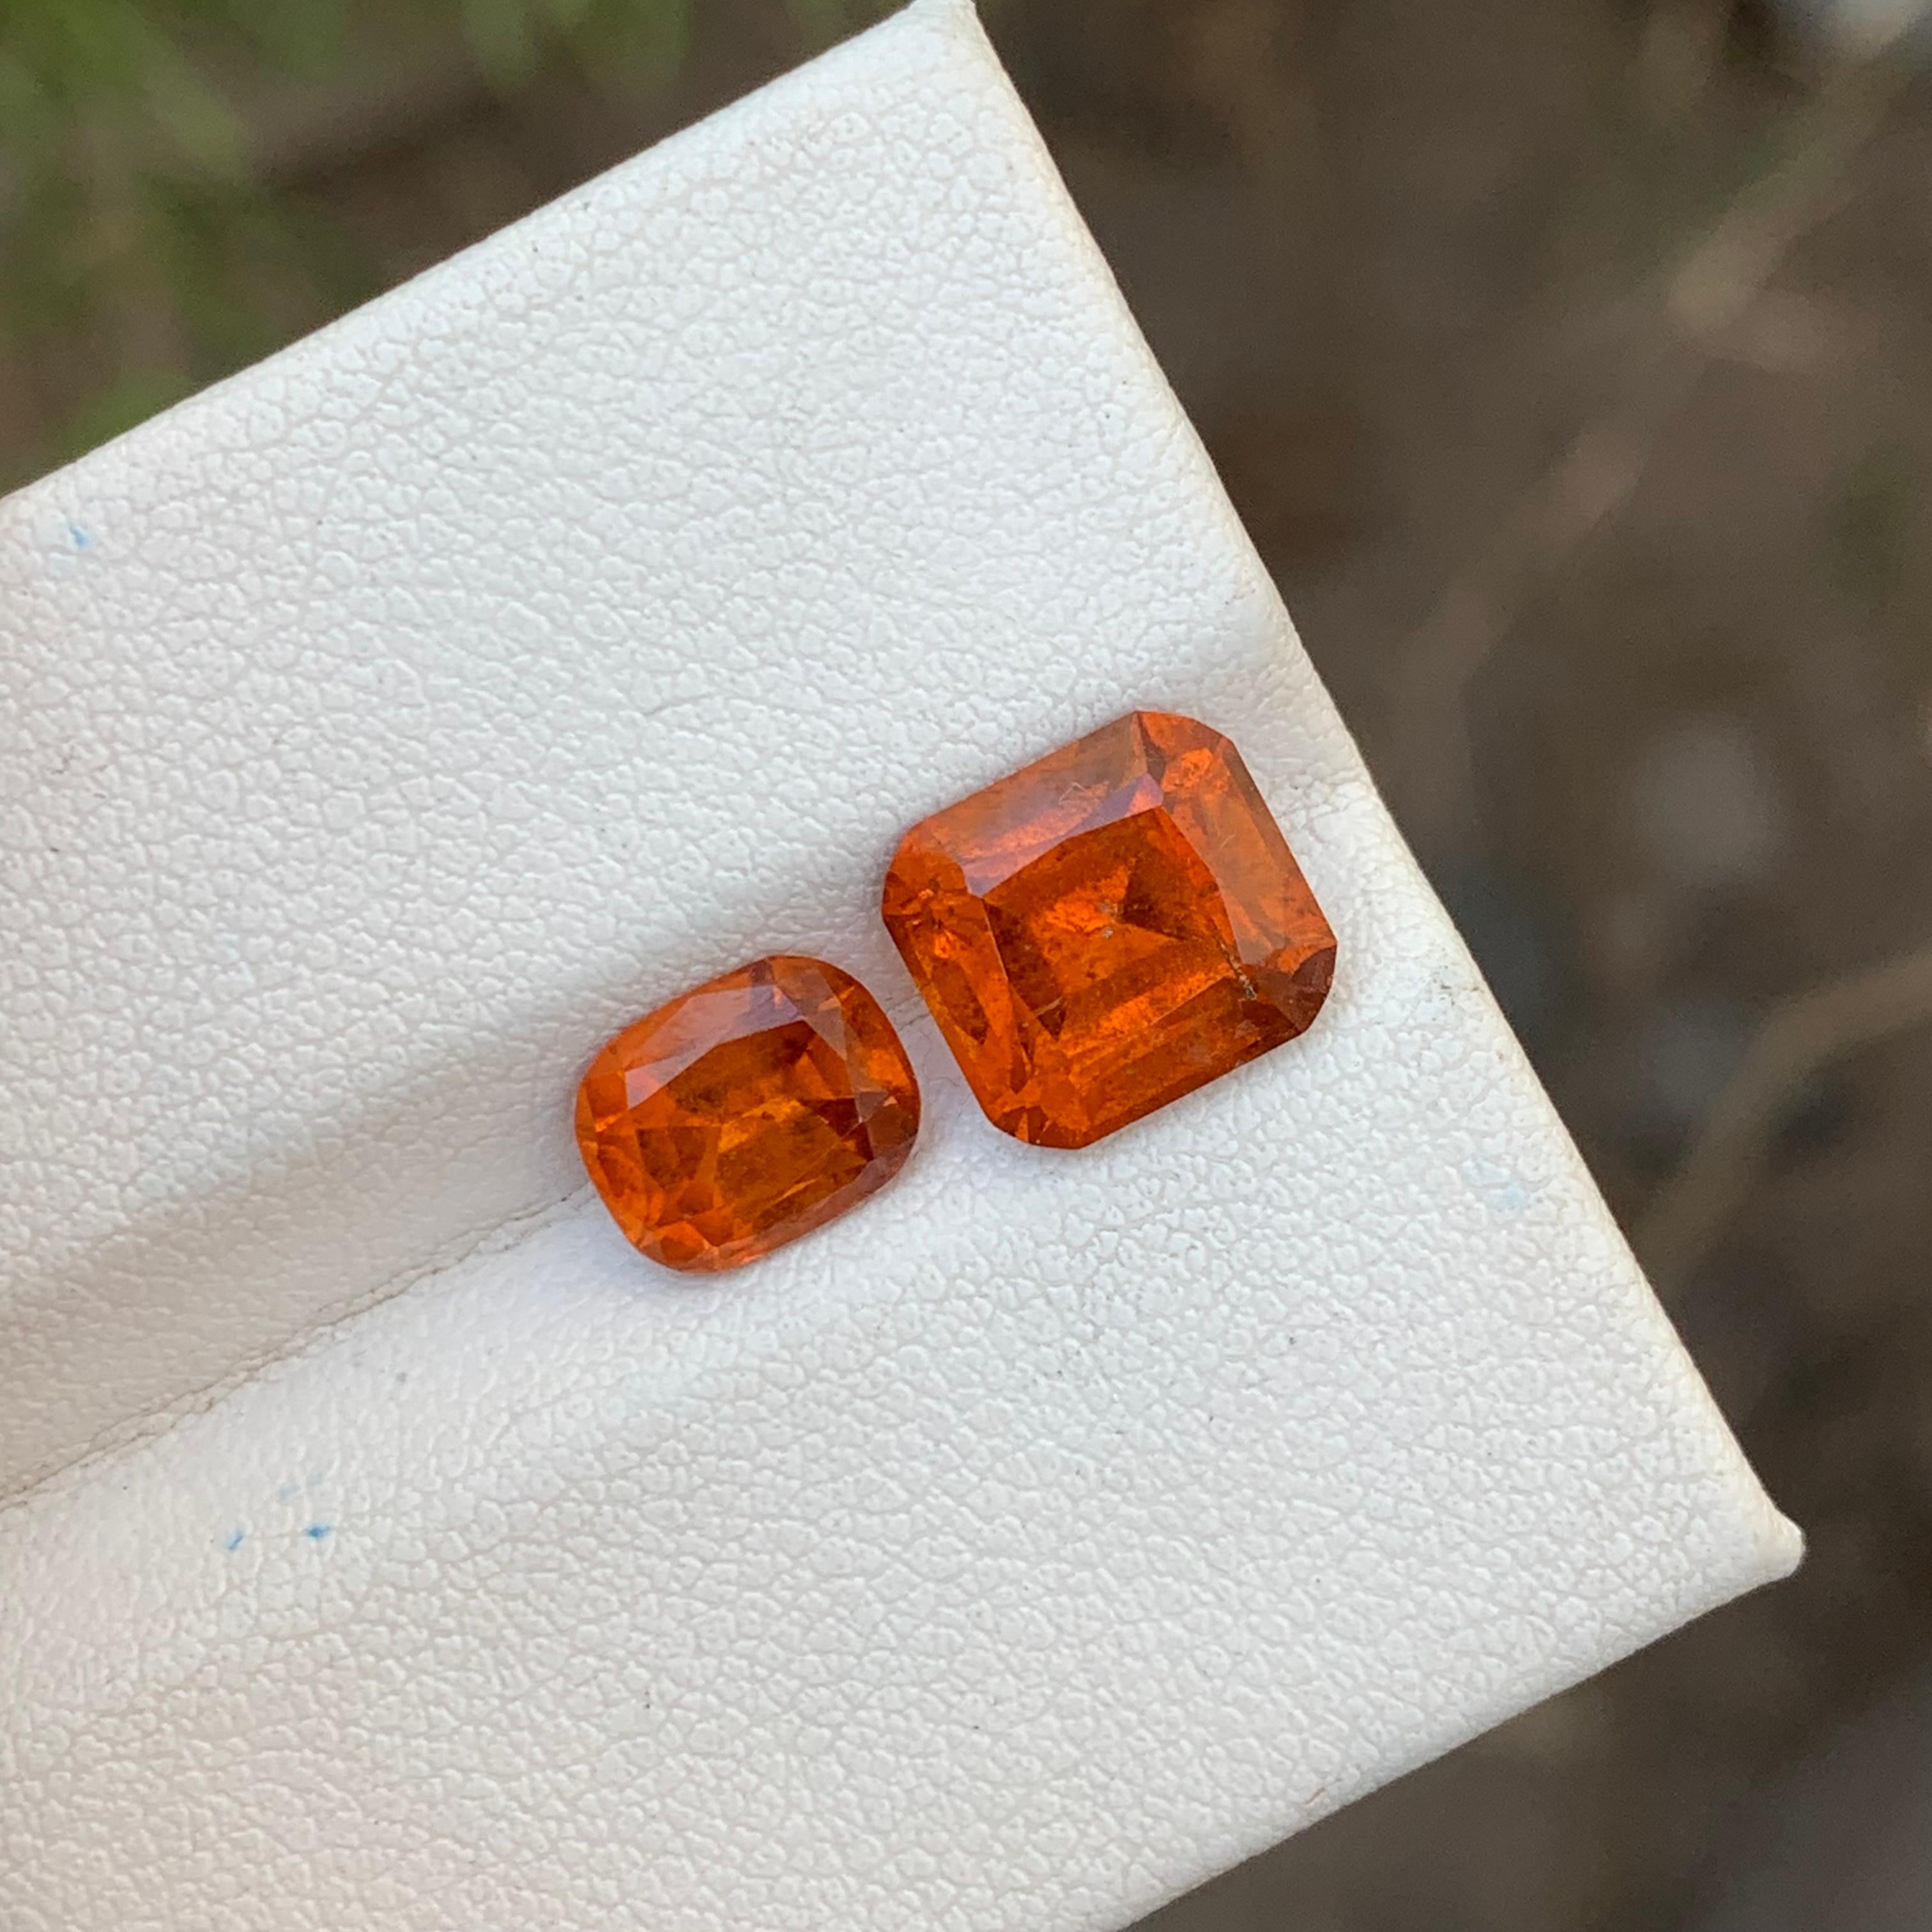 5.95 Carats Natural Loose Hessonite Garnet 2 Pieces For Ring Jewelry Making  en vente 11